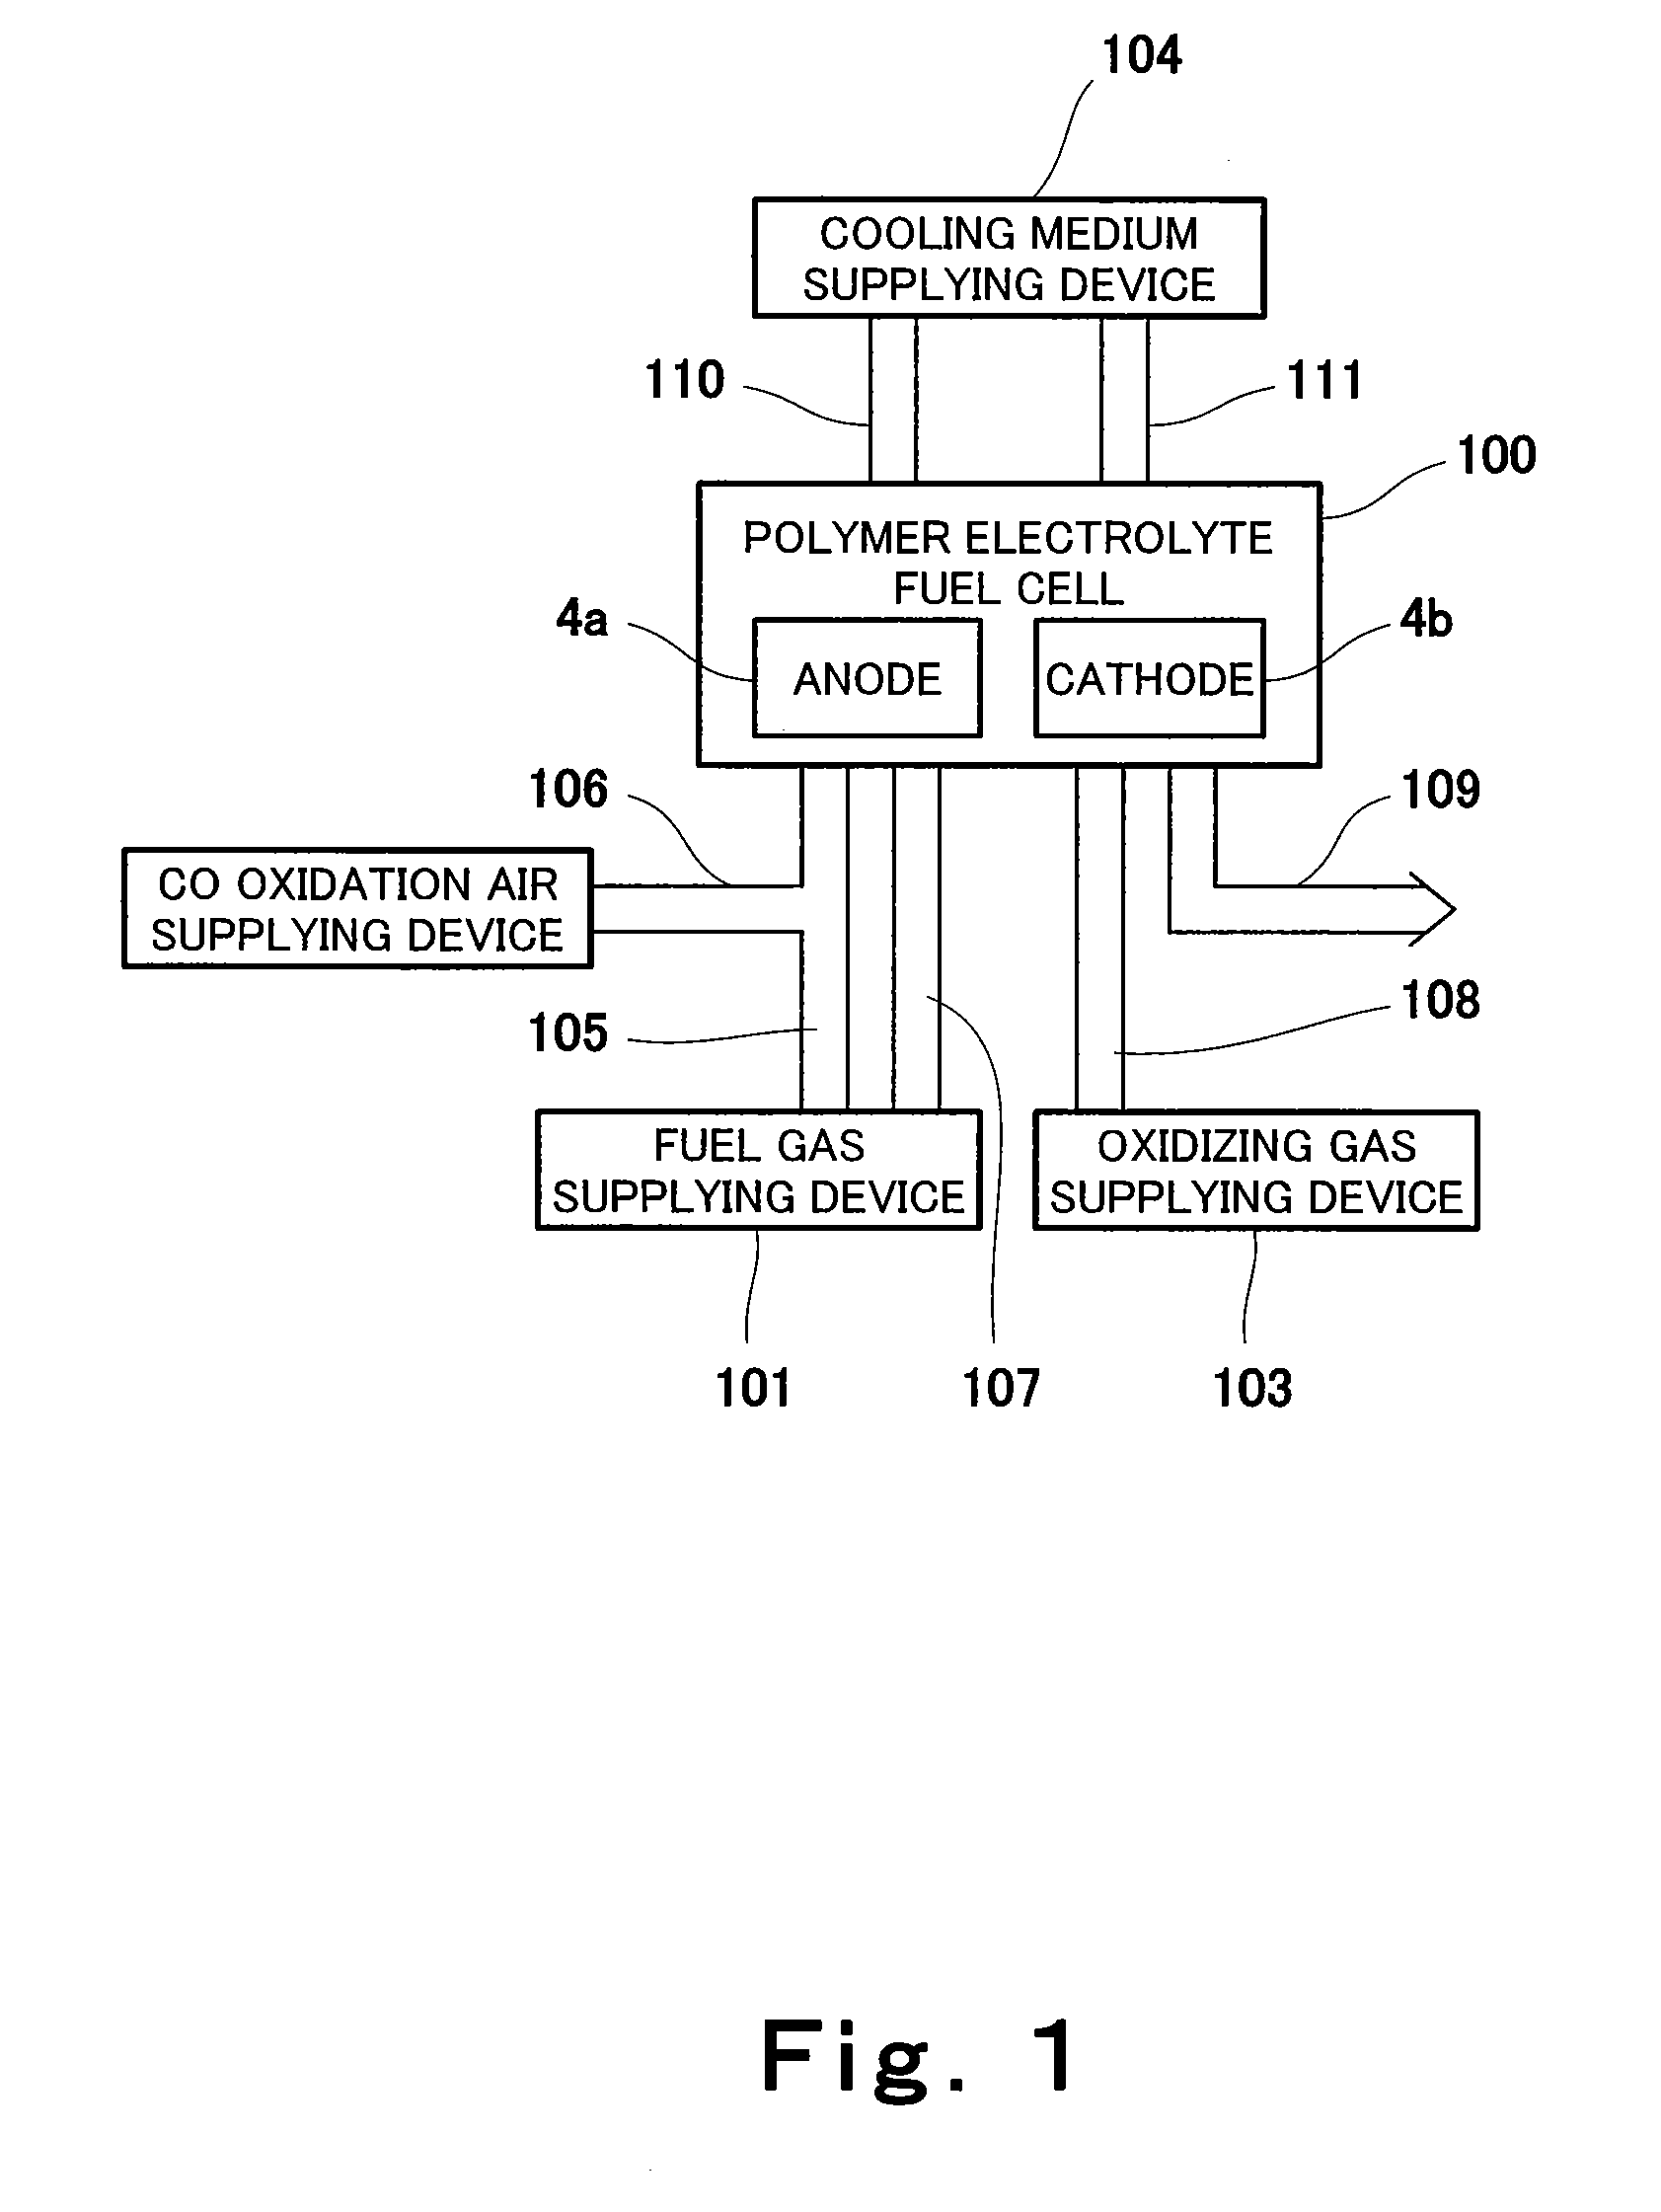 Polymer electrolyte fuel cell and fuel cell system including the same